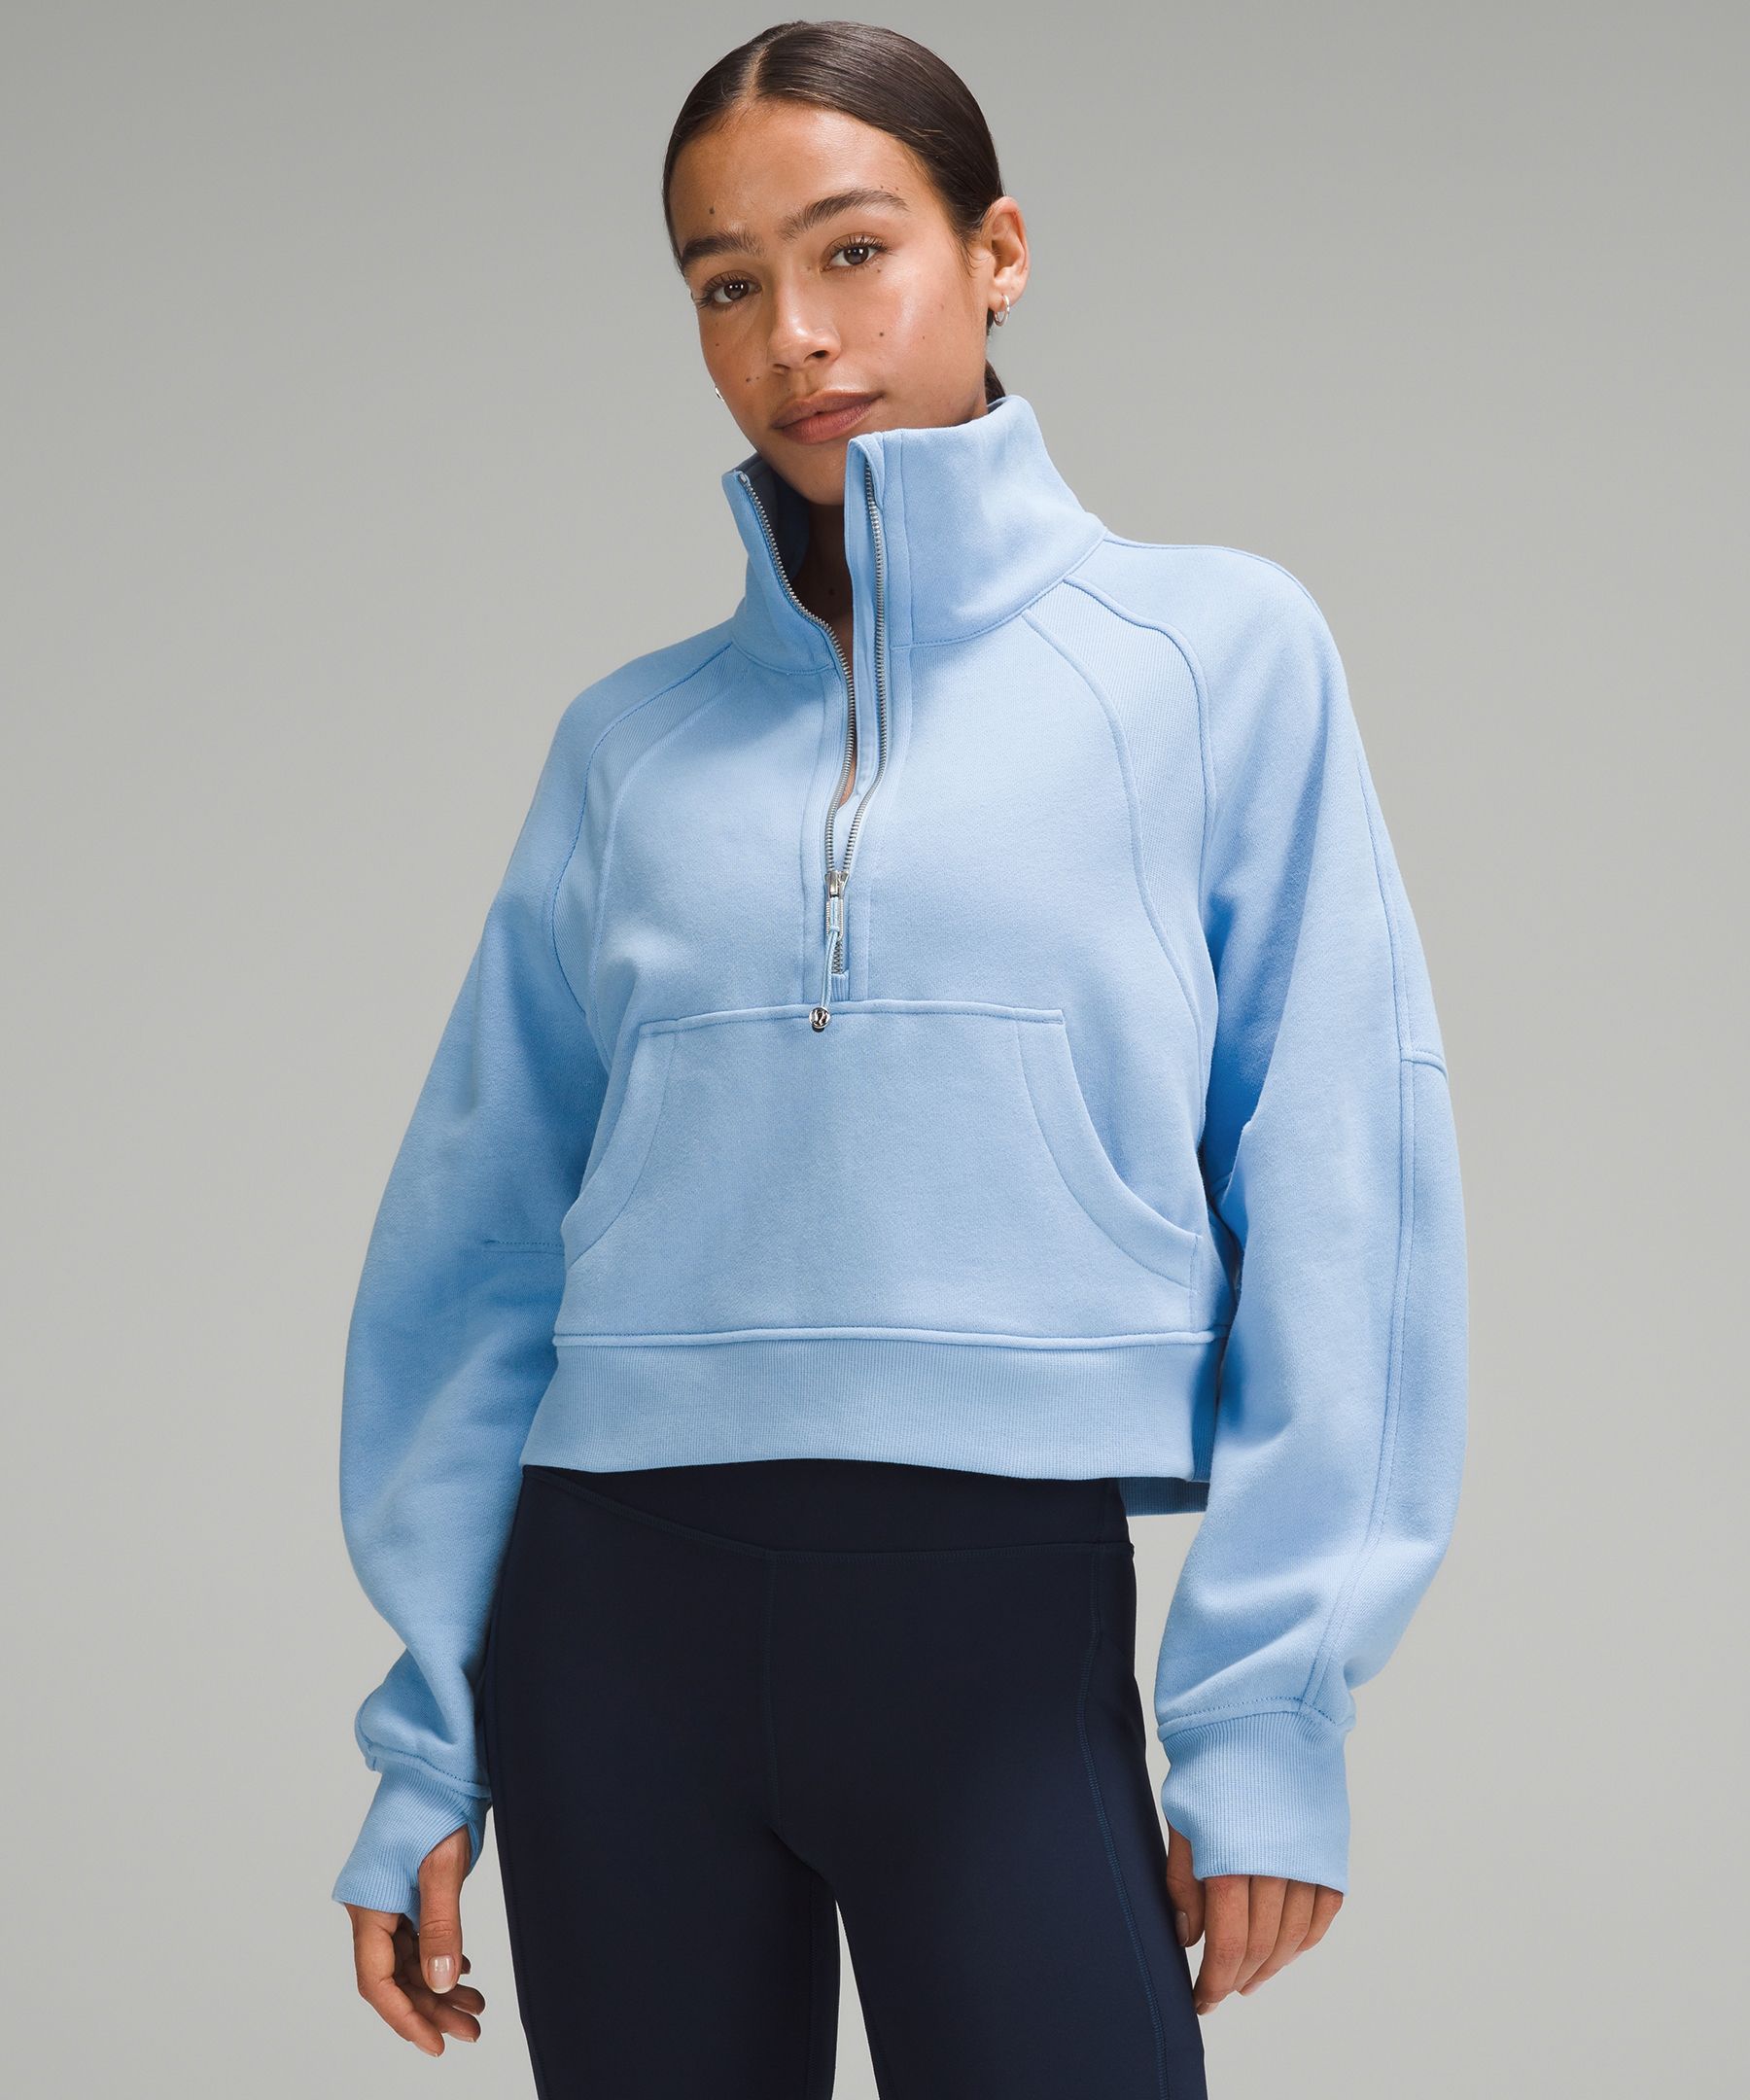 Scuba oversized half zip now have gold zippers in all colors. : r/lululemon